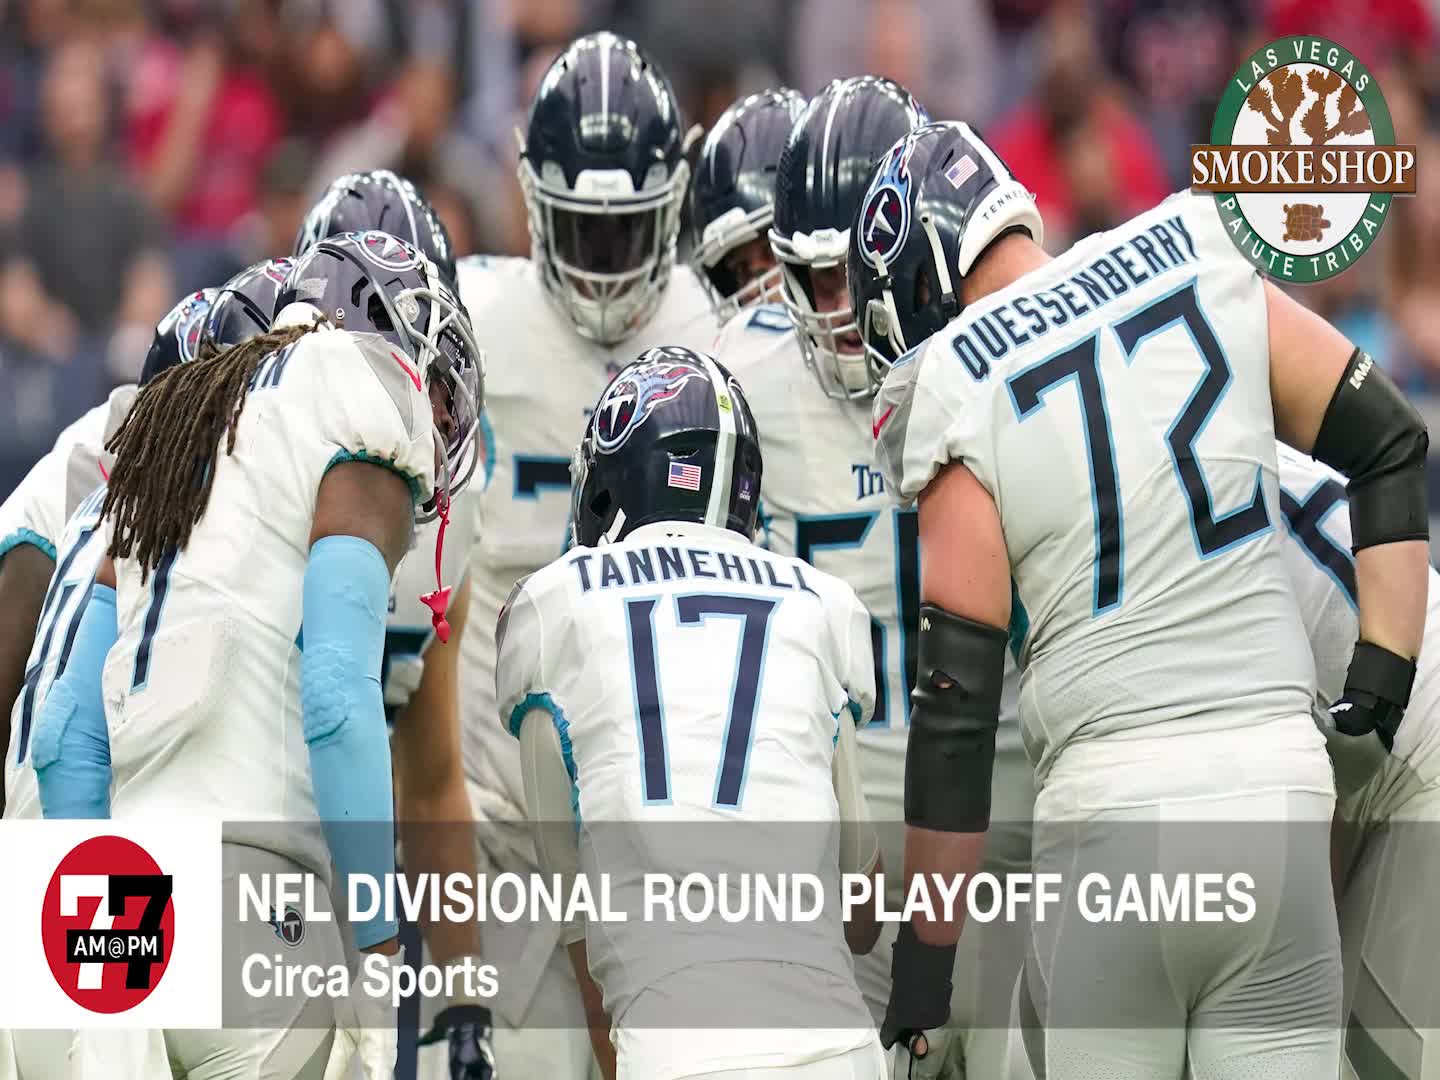 7@7PM NFL Divisional Round Playoff Games